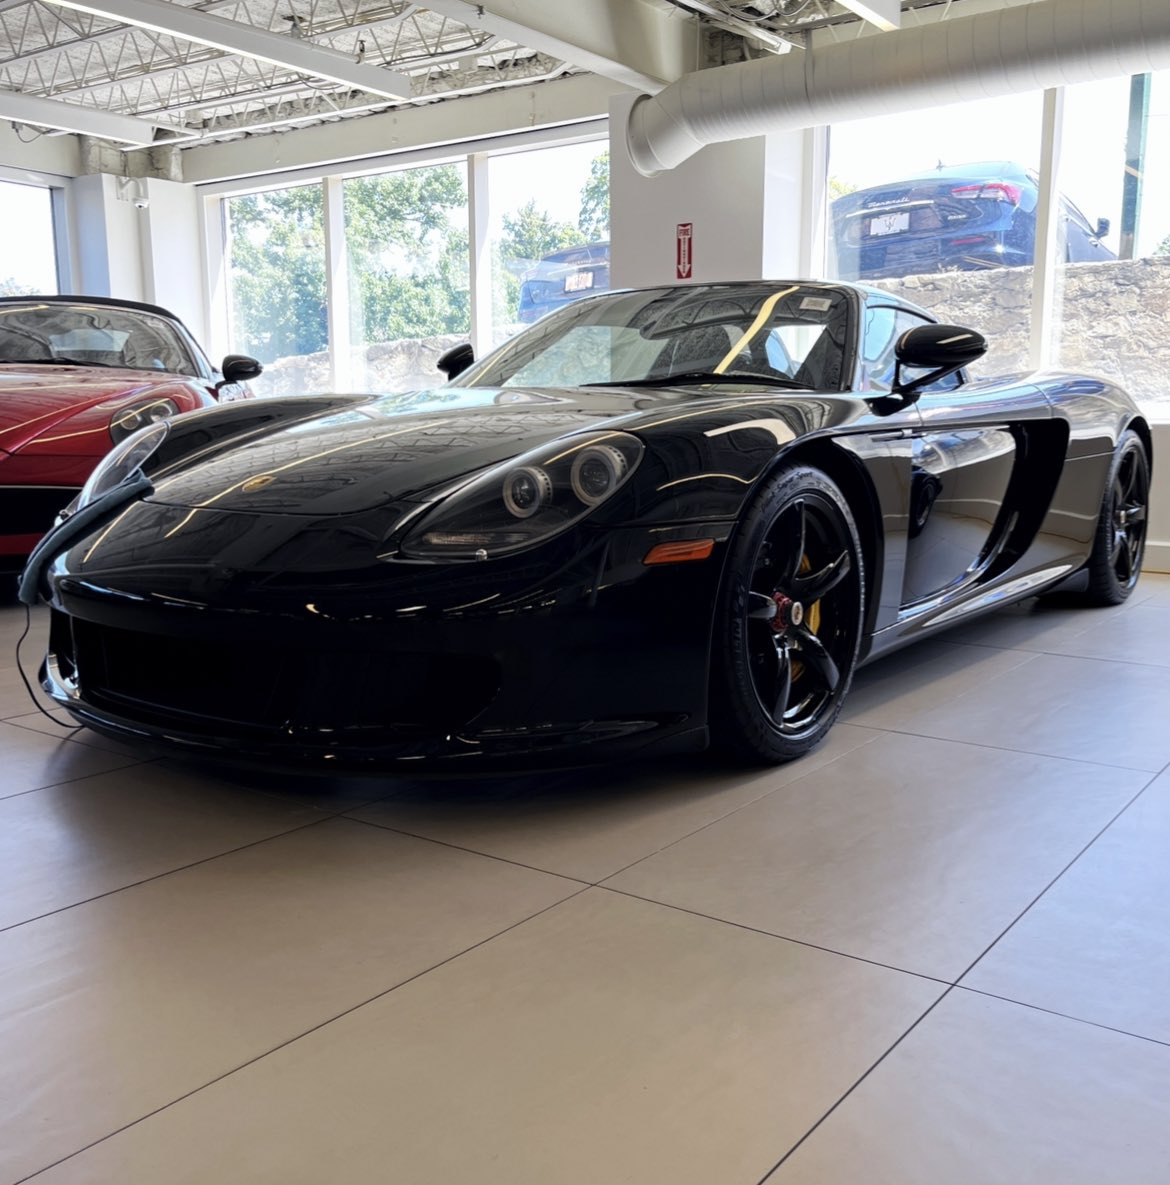 For the full post click here: instagram.com/p/CinCRn2uP4G/…

This particular example shown here is a 2005 Porsche Carrera GT, finished in Black (A1A1) over dark grey leather seats, and is shown here equipped with a number of desirable options!

#CarreraGT #PorscheCarreraGT